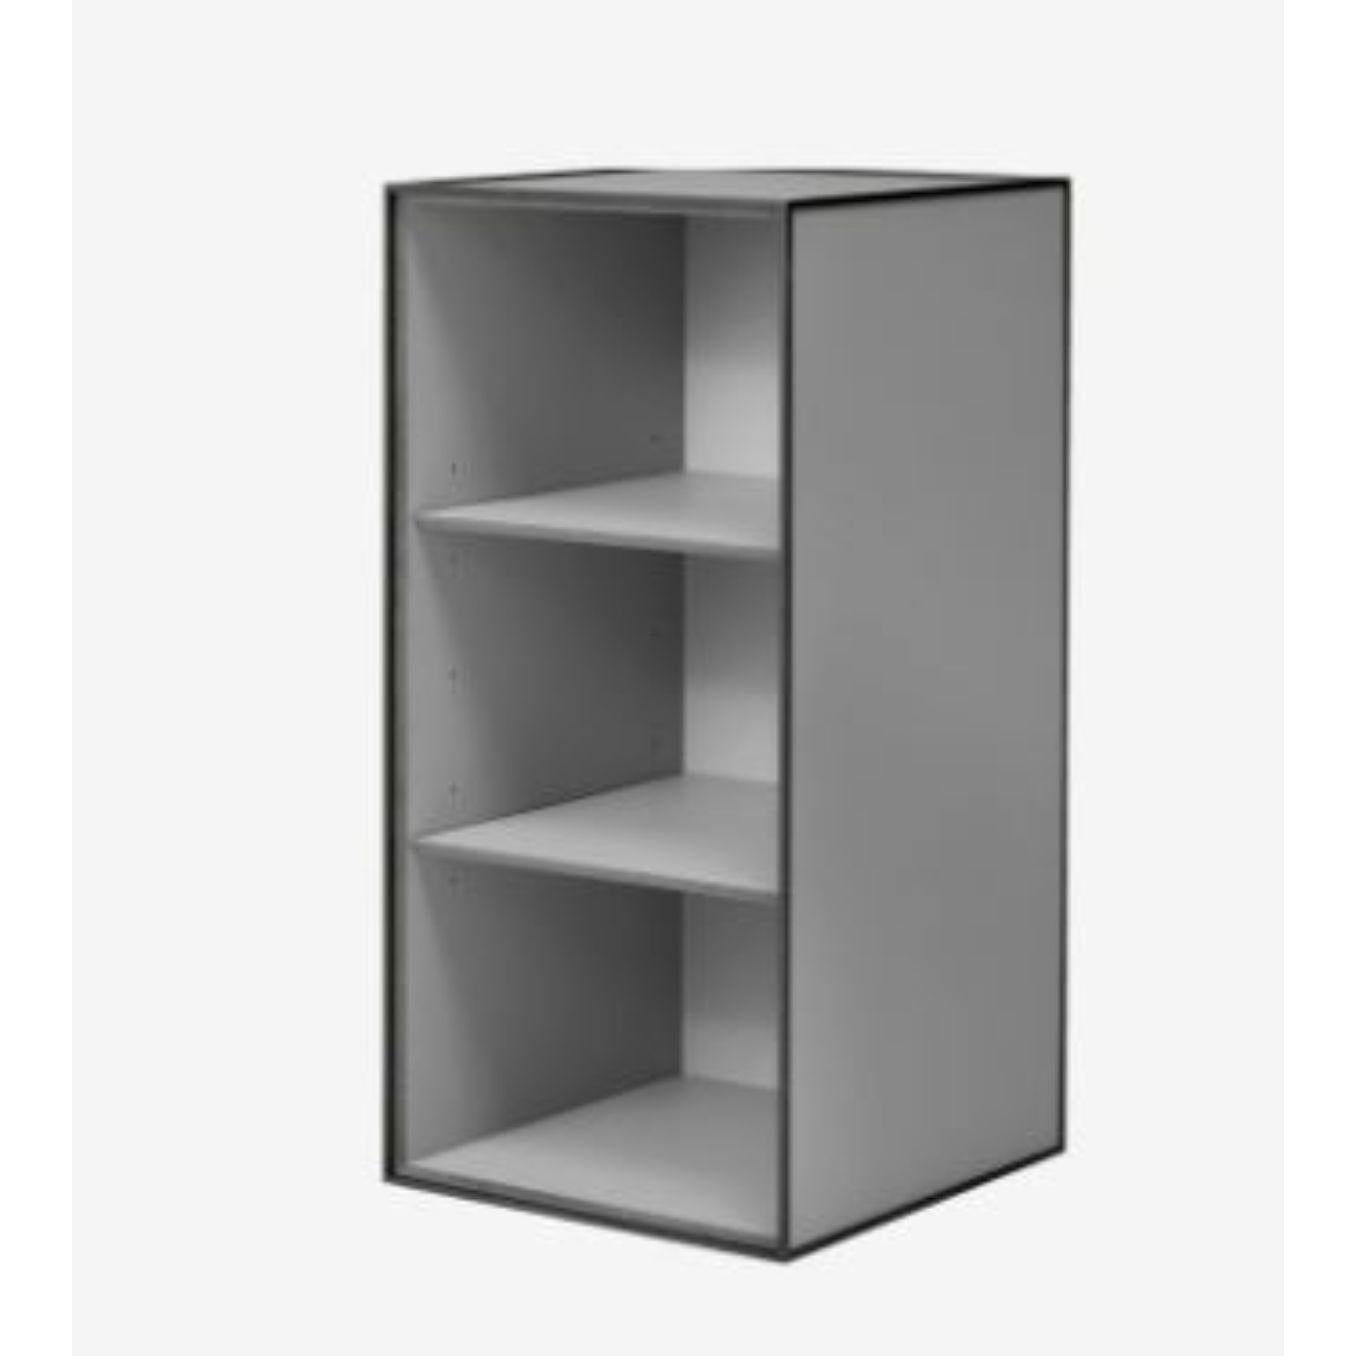 70 Dark grey frame box with 2 shelves by Lassen
Dimensions: D 35 x W 35 x H 70 cm 
Materials: finér, melamin, melamin, melamine, metal, veneer
Also available in different colors and dimensions. 
Weight: 13 Kg


By Lassen is a Danish design